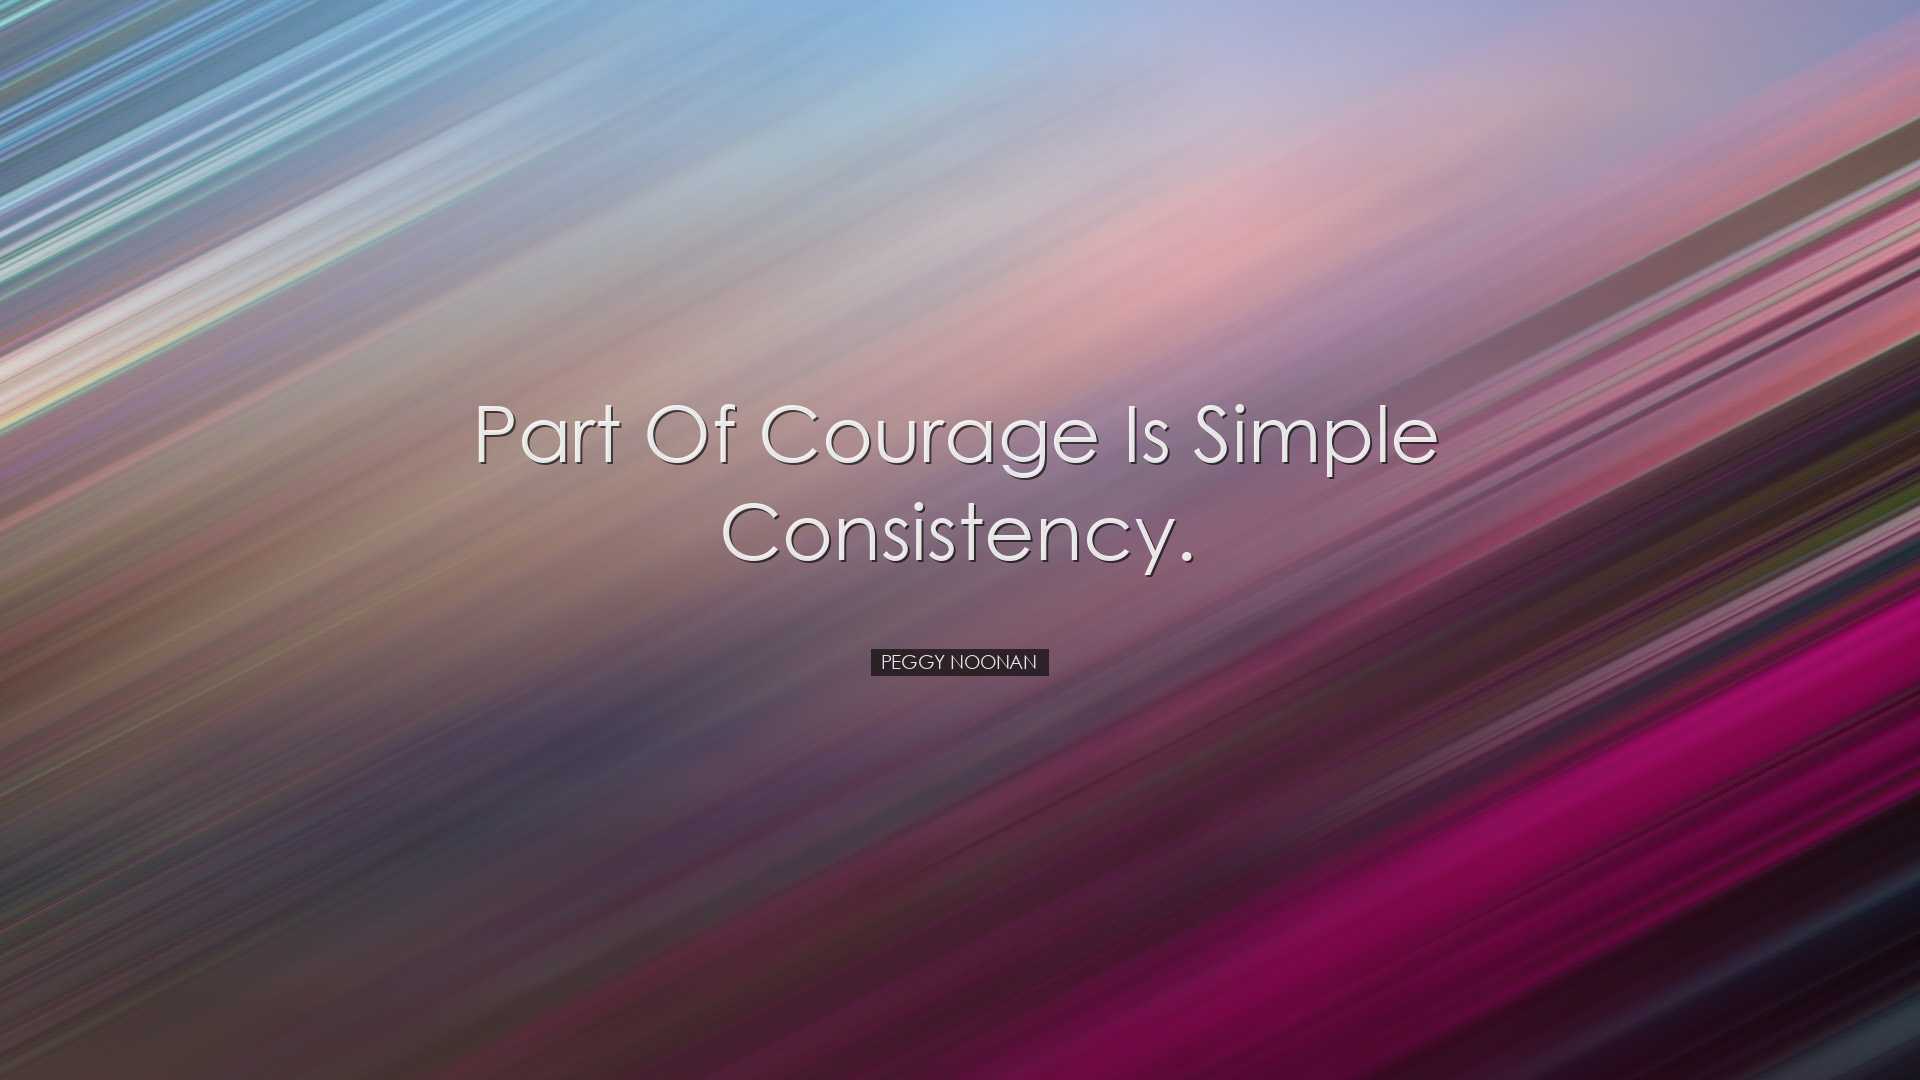 Part of courage is simple consistency. - Peggy Noonan